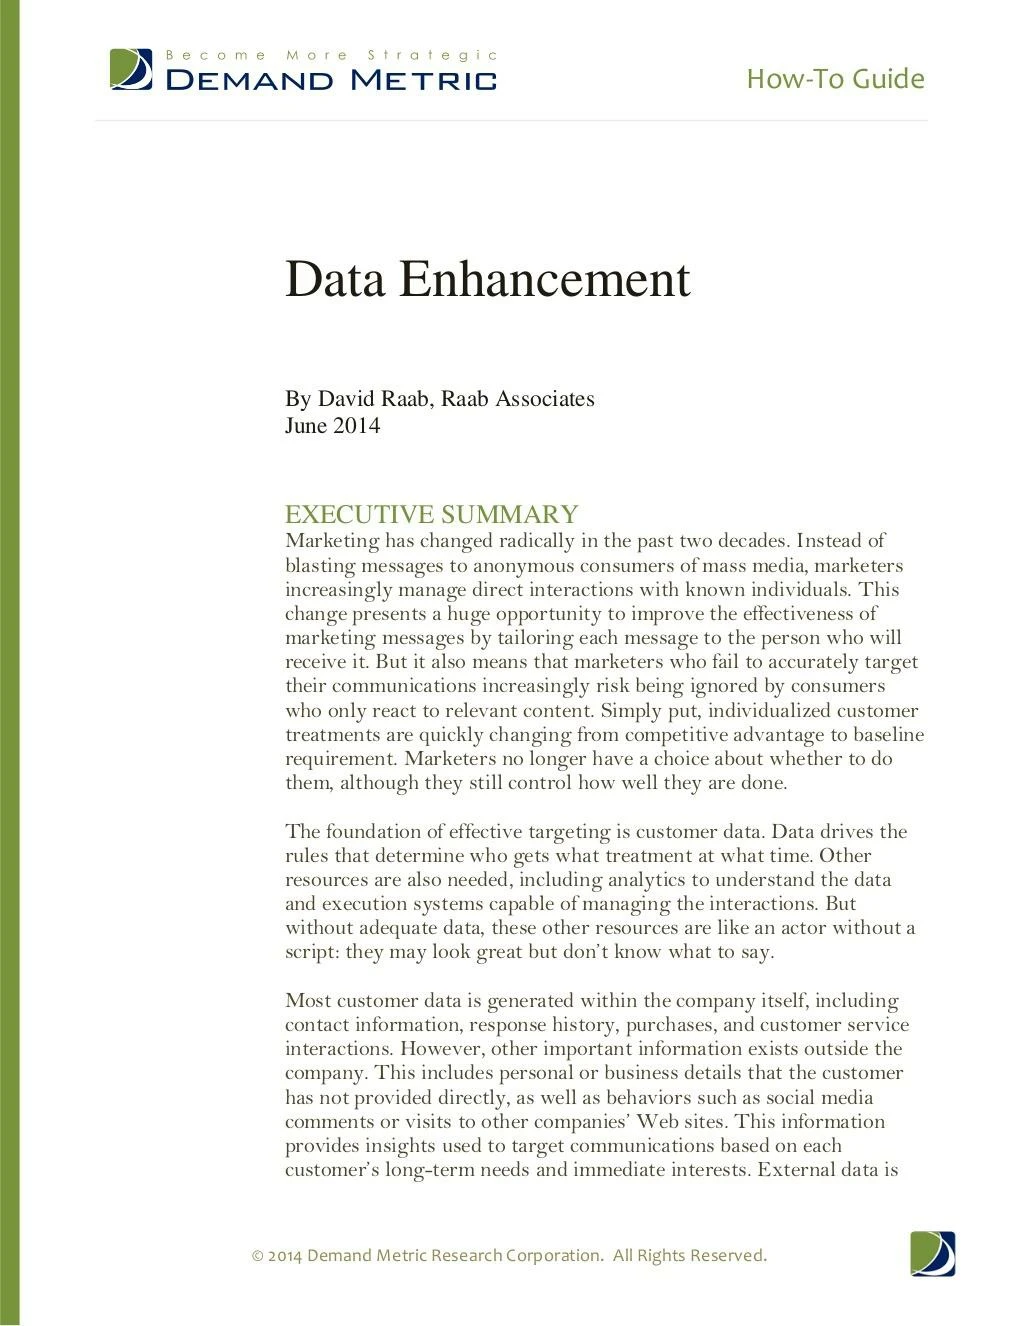 how to guide data enhancement